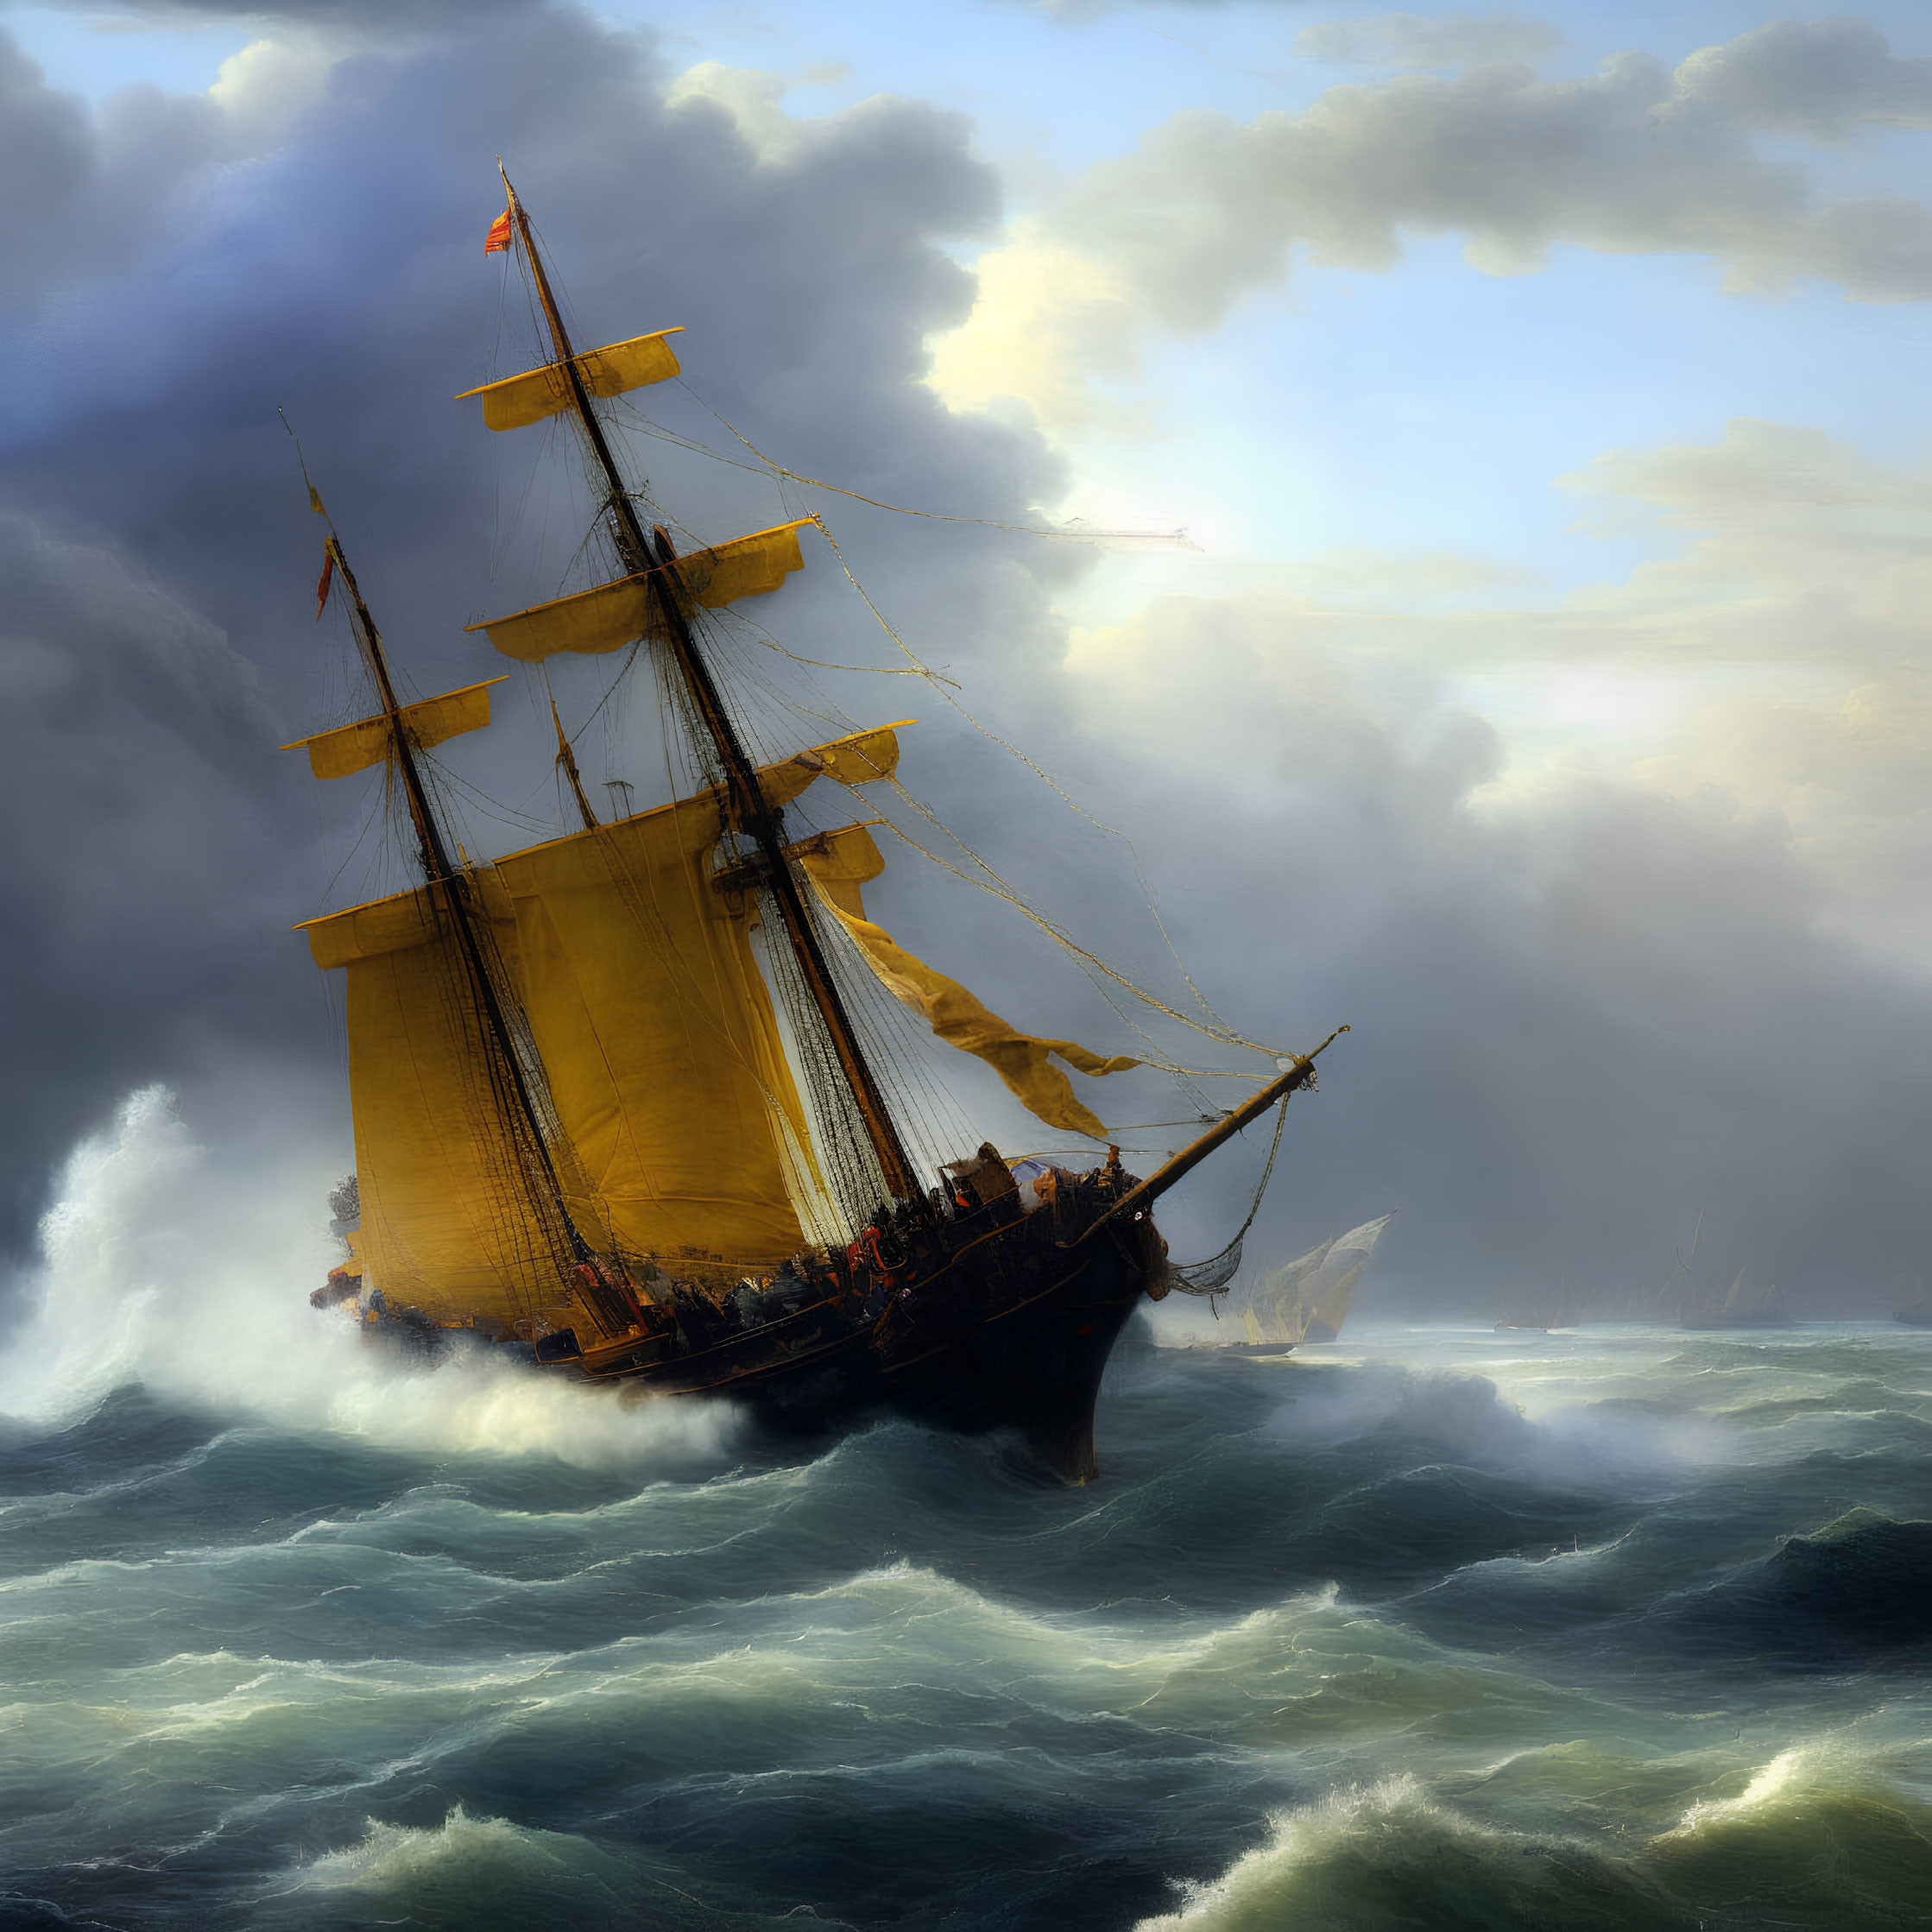 Tall Ship with Yellow Sails Sailing Stormy Seas under Dramatic Sky